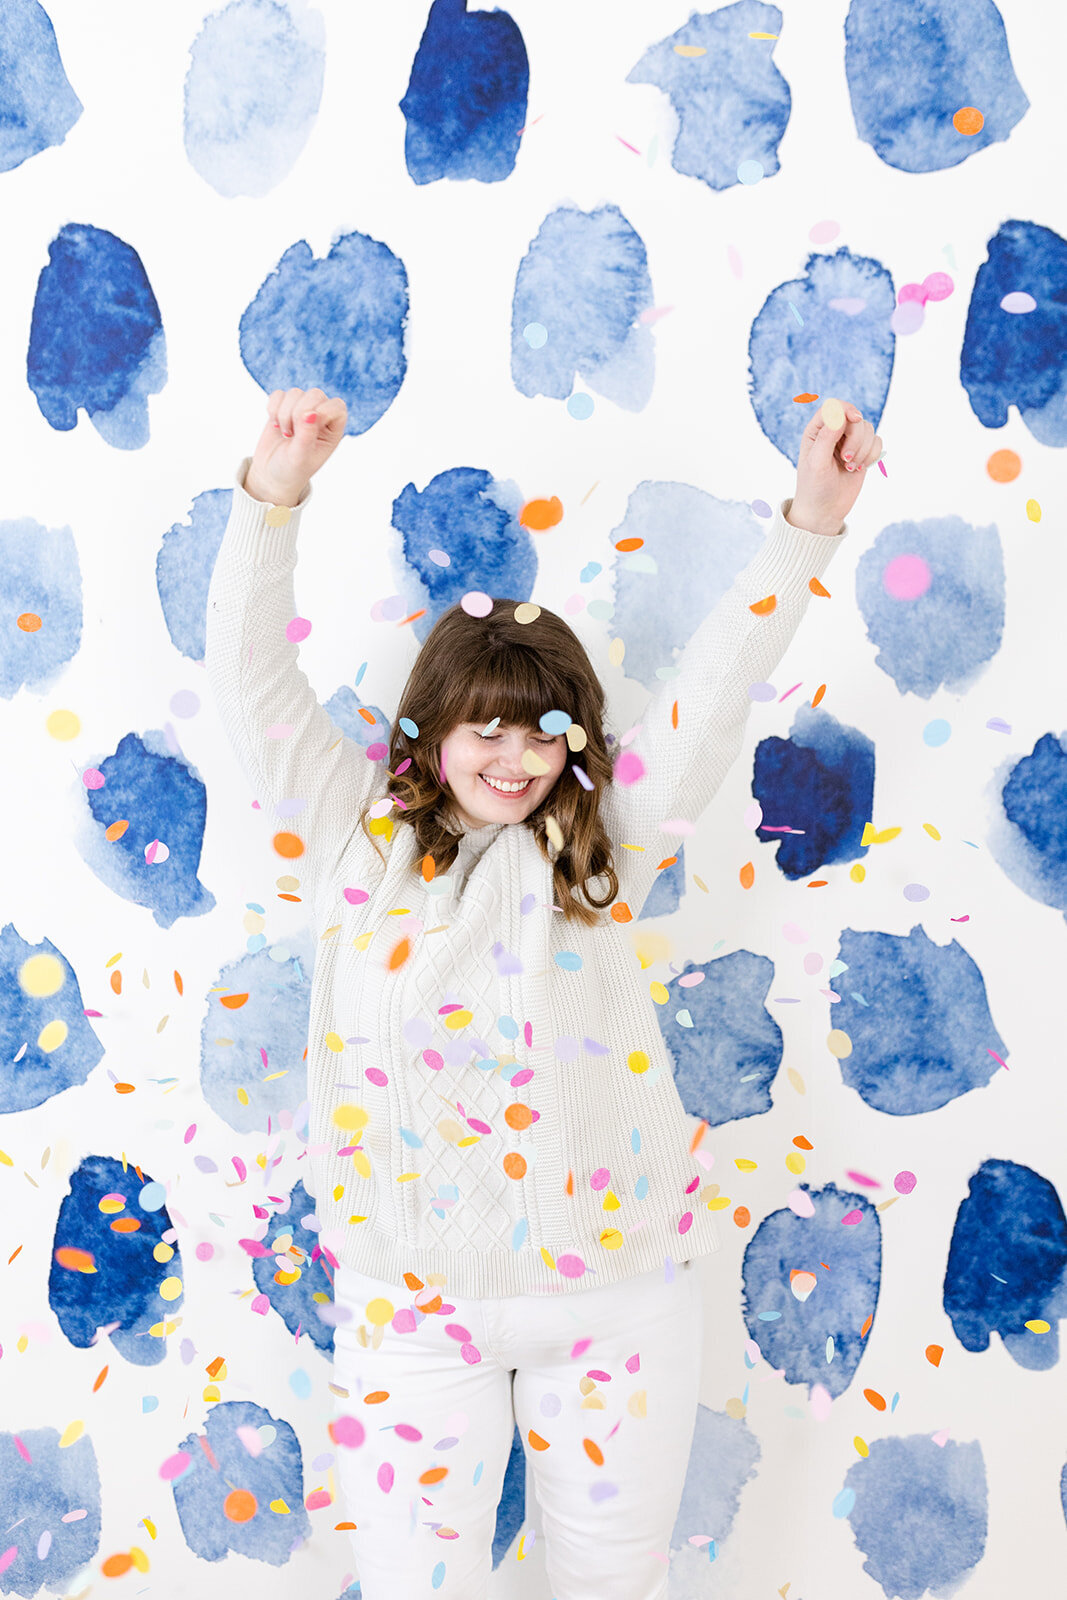 confetti with fun wall for branding photos